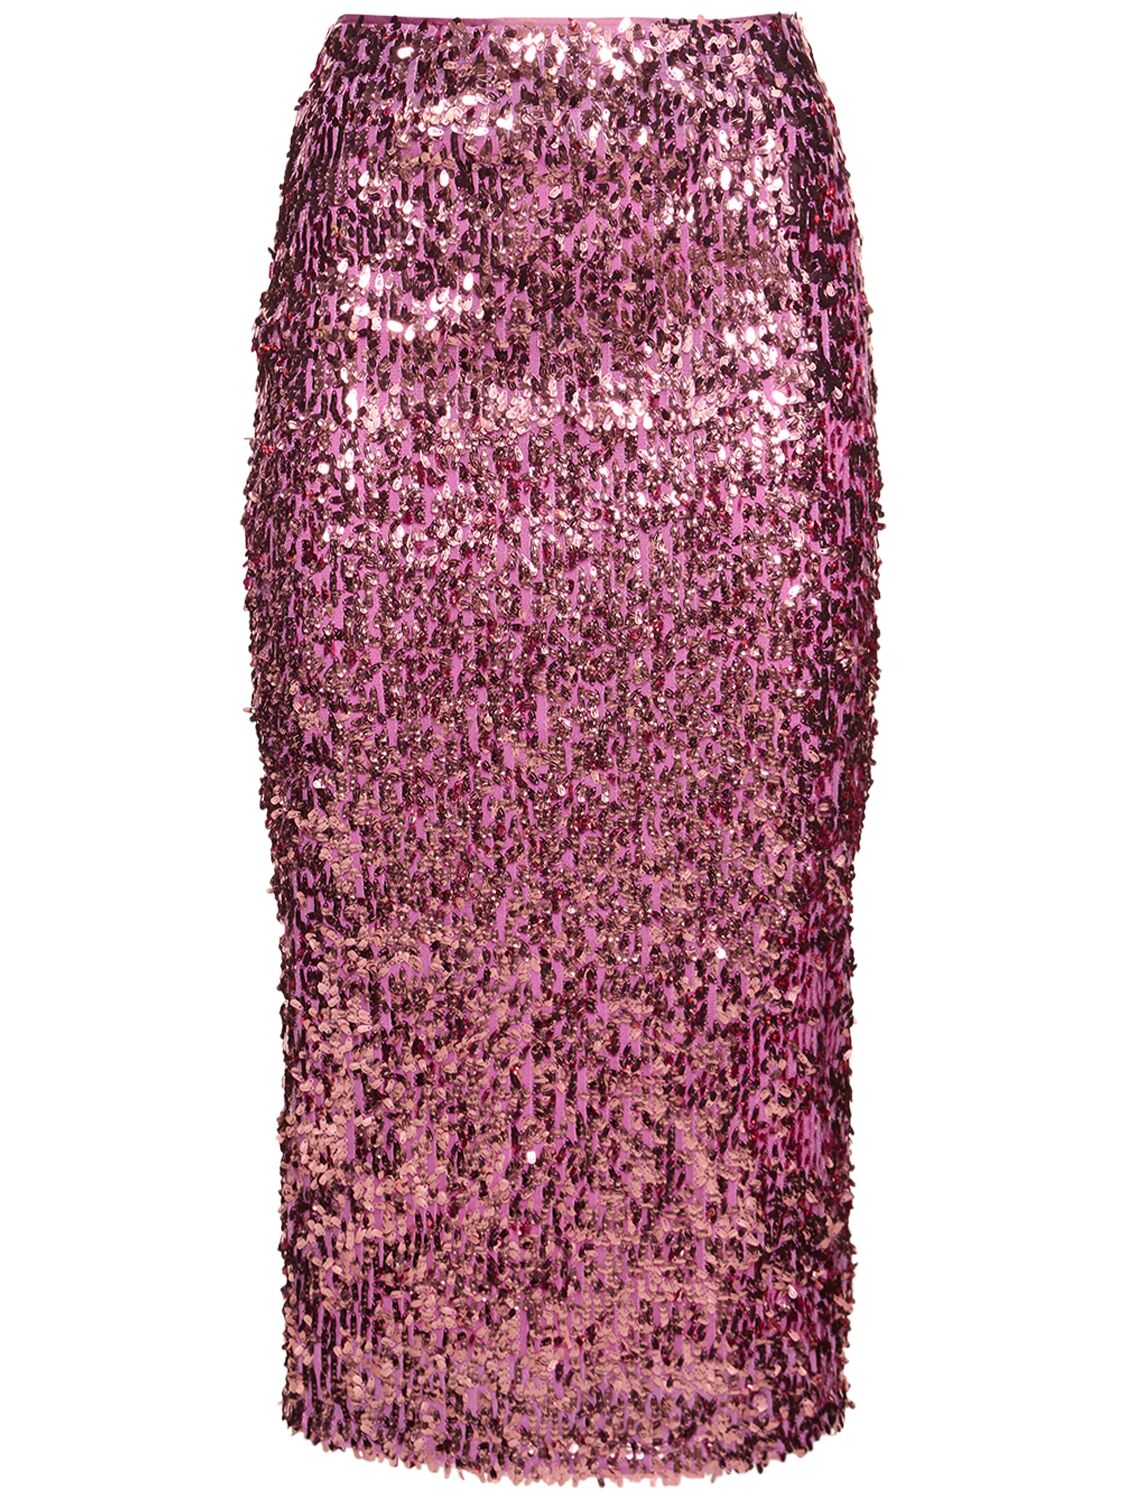 Image of Sequined Pencil Midi Skirt